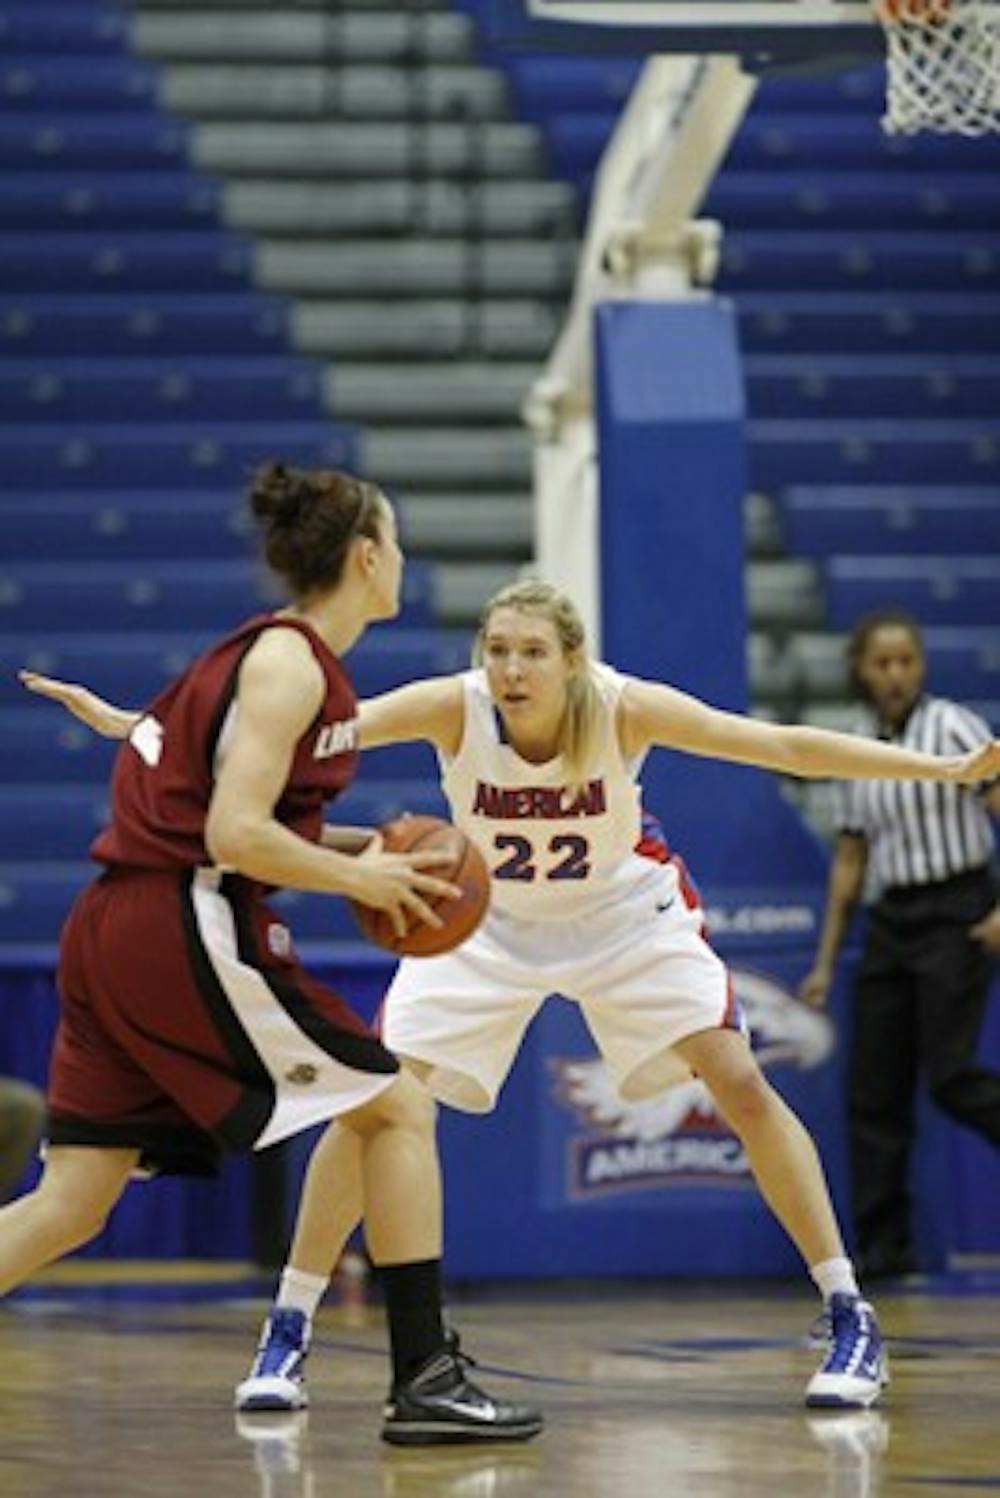 DEFENSE â€” Liz Leer defends against the Lafayette Leopards in a game earlier this year. Leer scored 11 points in AUâ€™s 70-61 win over the College of Holy Cross on Saturday. The Eagles moved to 11-1 on the season in Patriot League play. The team has one more home game against Navy on Wednesday. 